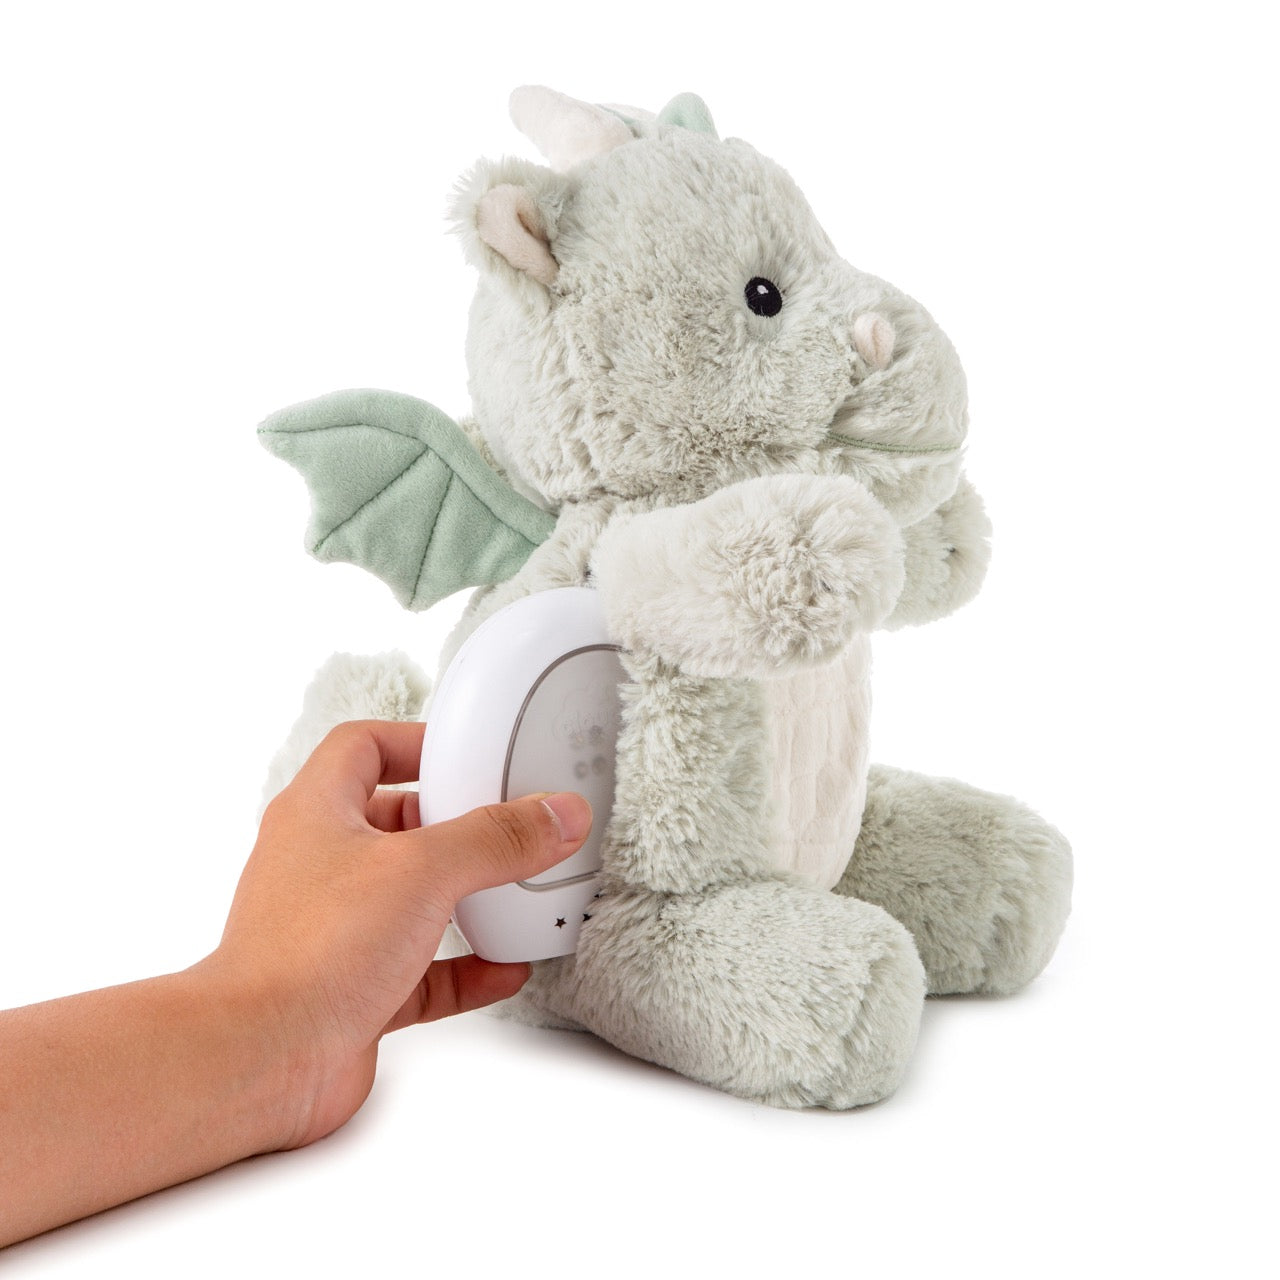 Cloud B Sound Machine with White Noise Soothing Sounds | Cuddly Stuffed Animal & Nomadic Nightlight | Record Parent Voice | Adjustable Settings 